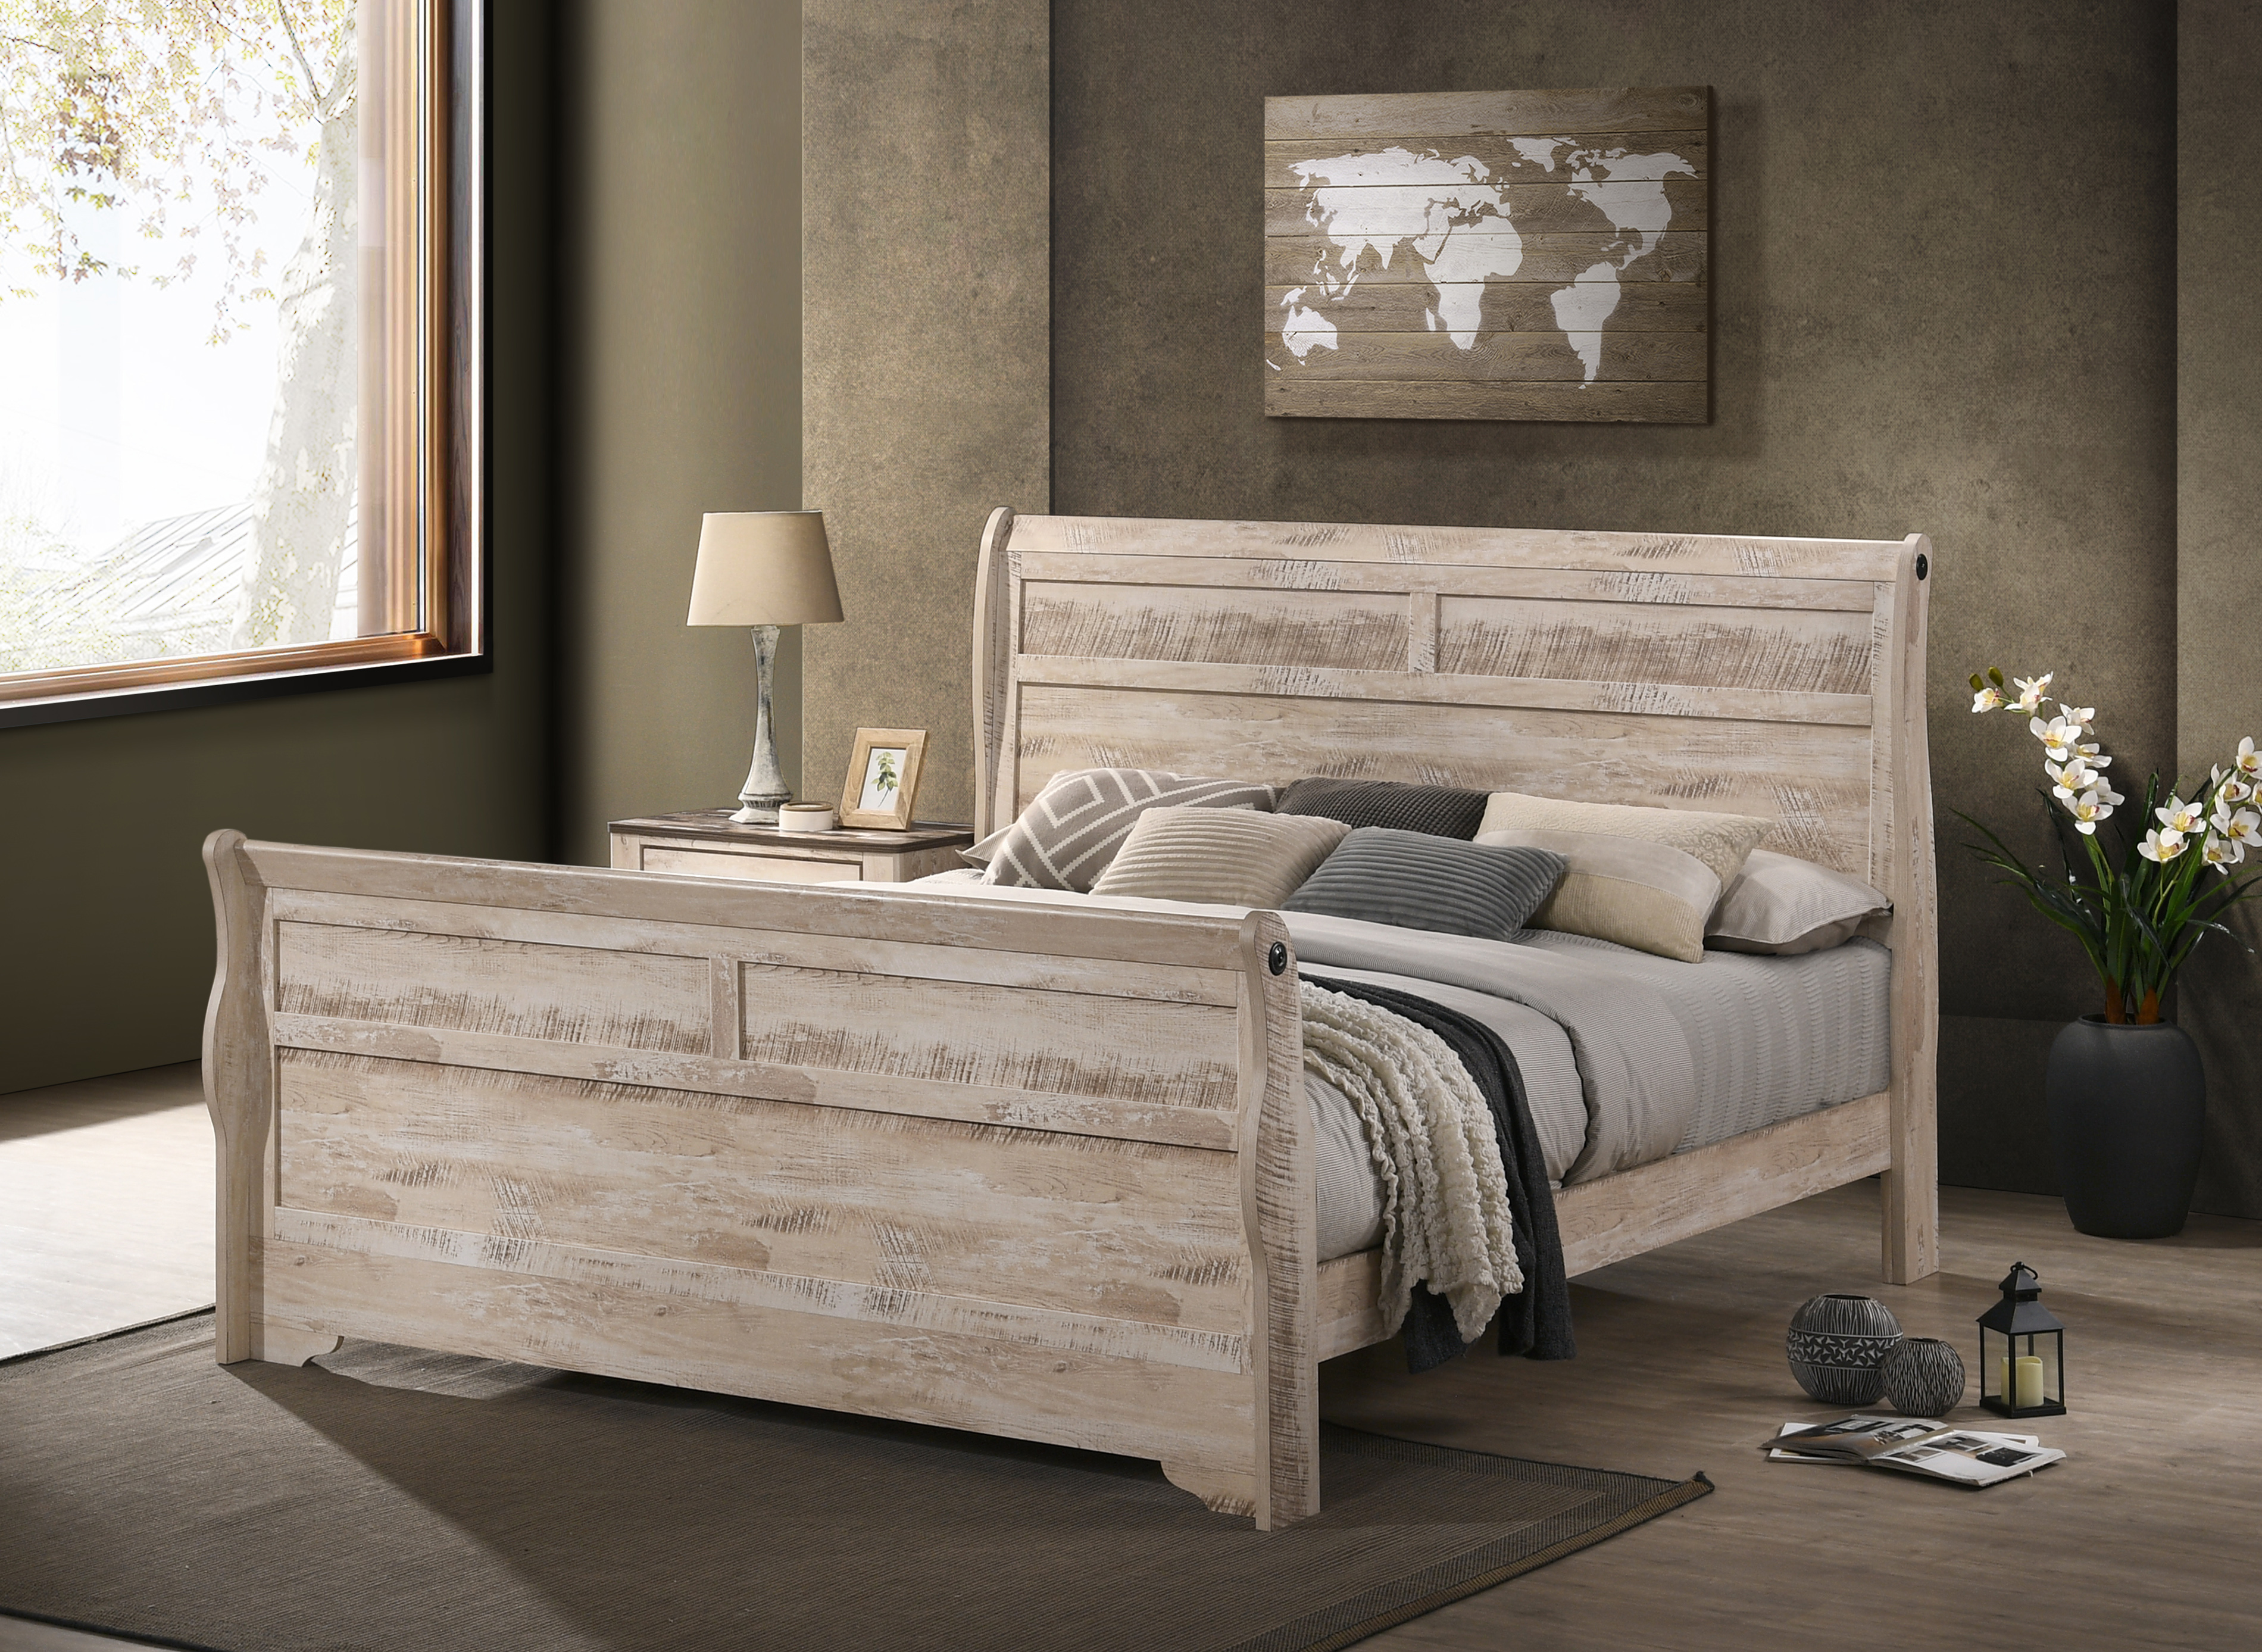 Imerland Contemporary White Wash Finish Bedroom Set with King Sleigh Bed, Dresser, Mirror, Two Nightstands - image 3 of 12